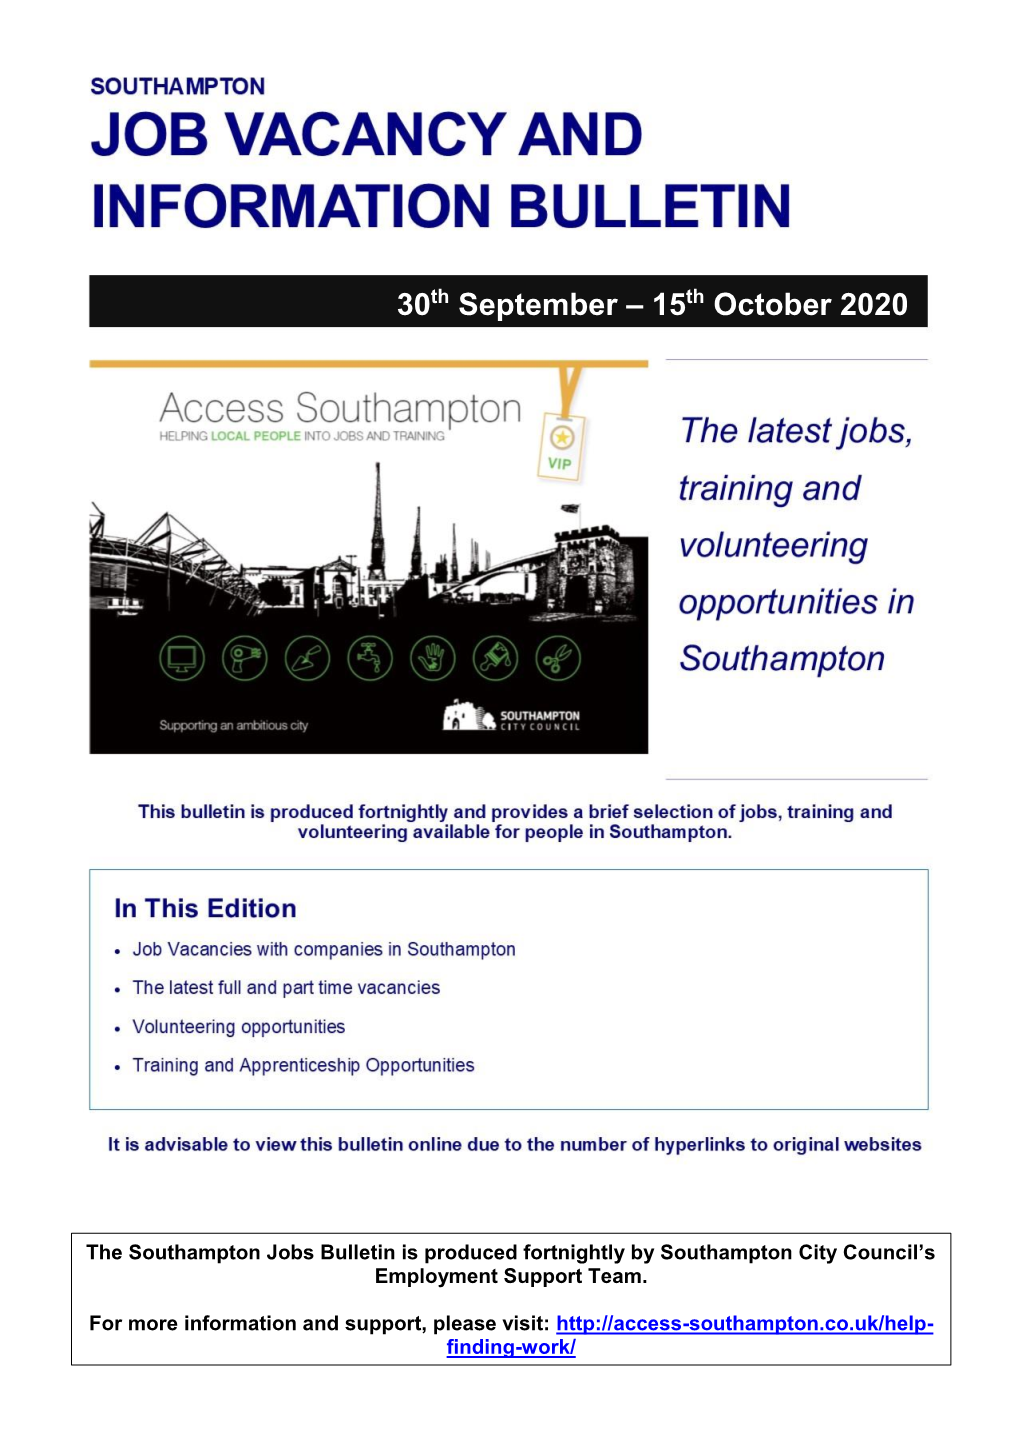 Southampton Jobs Bulletin Is Produced Fortnightly by Southampton City Council’S Employment Support Team